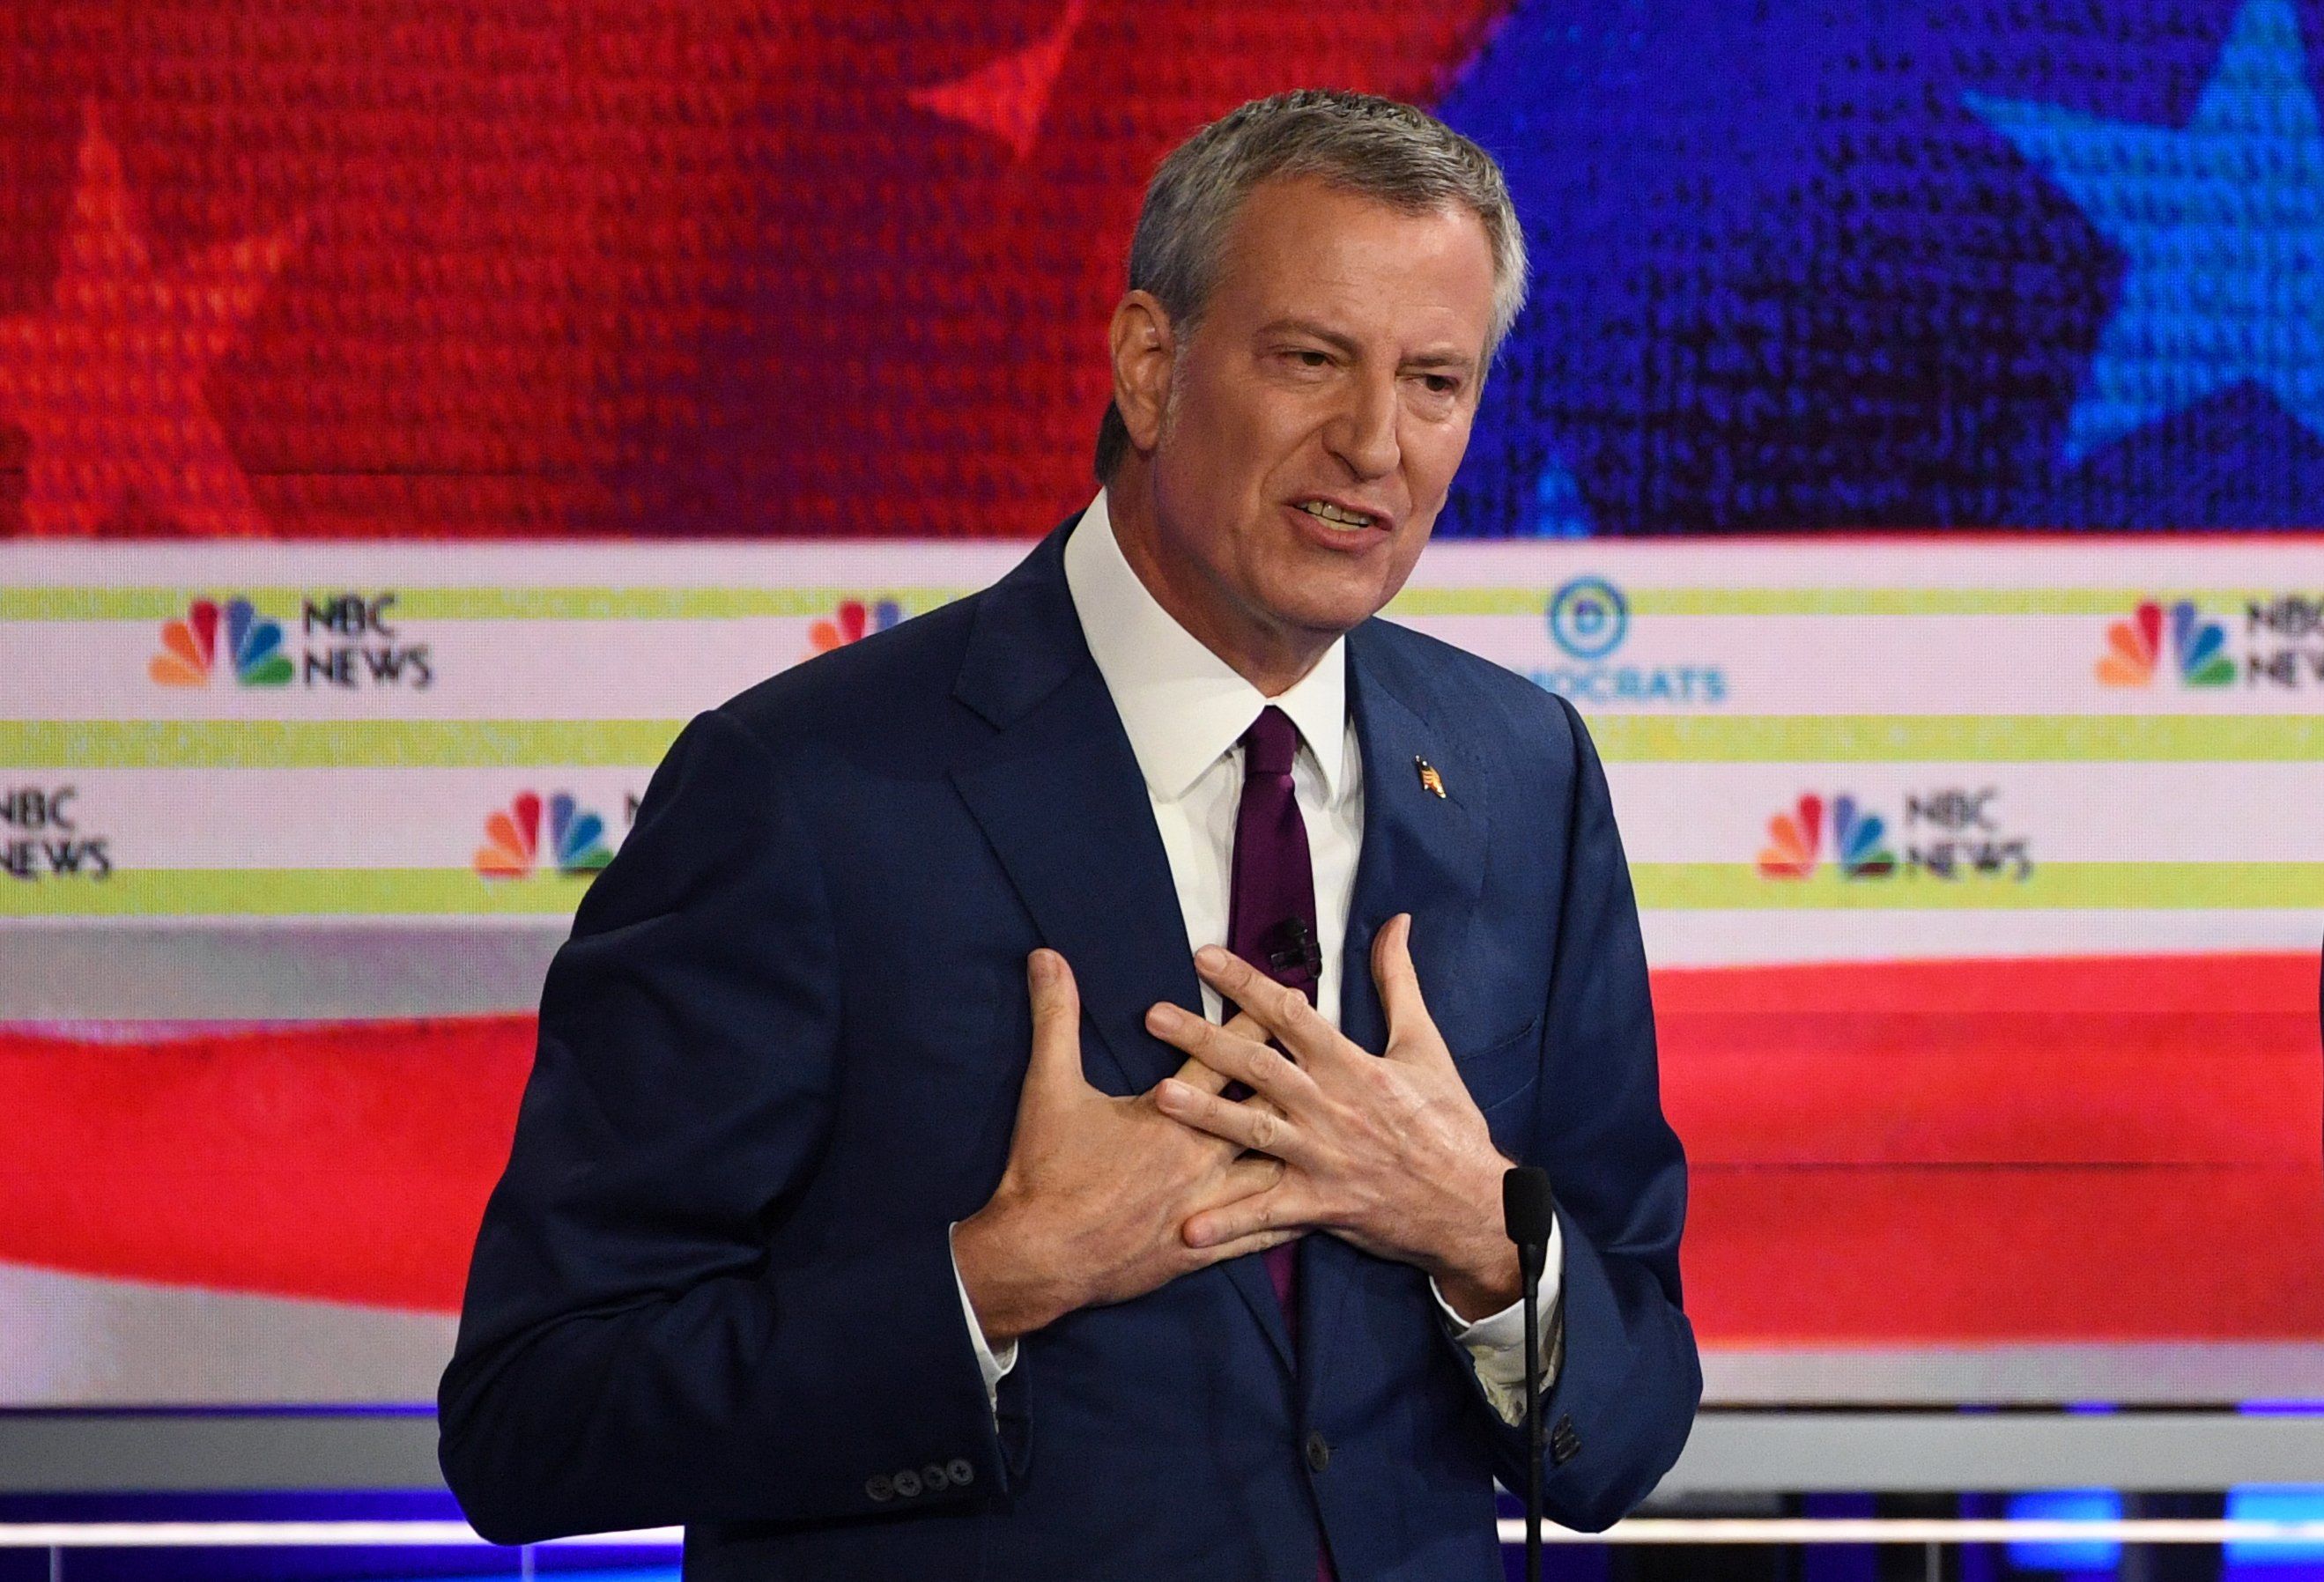  Democratic presidential hopeful Mayor of New York City Bill de Blasio participates in the first Democratic primary debate of the 2020 presidential campaign at the Adrienne Arsht Center for the Performing Arts in Miami, June 26, 2019. 